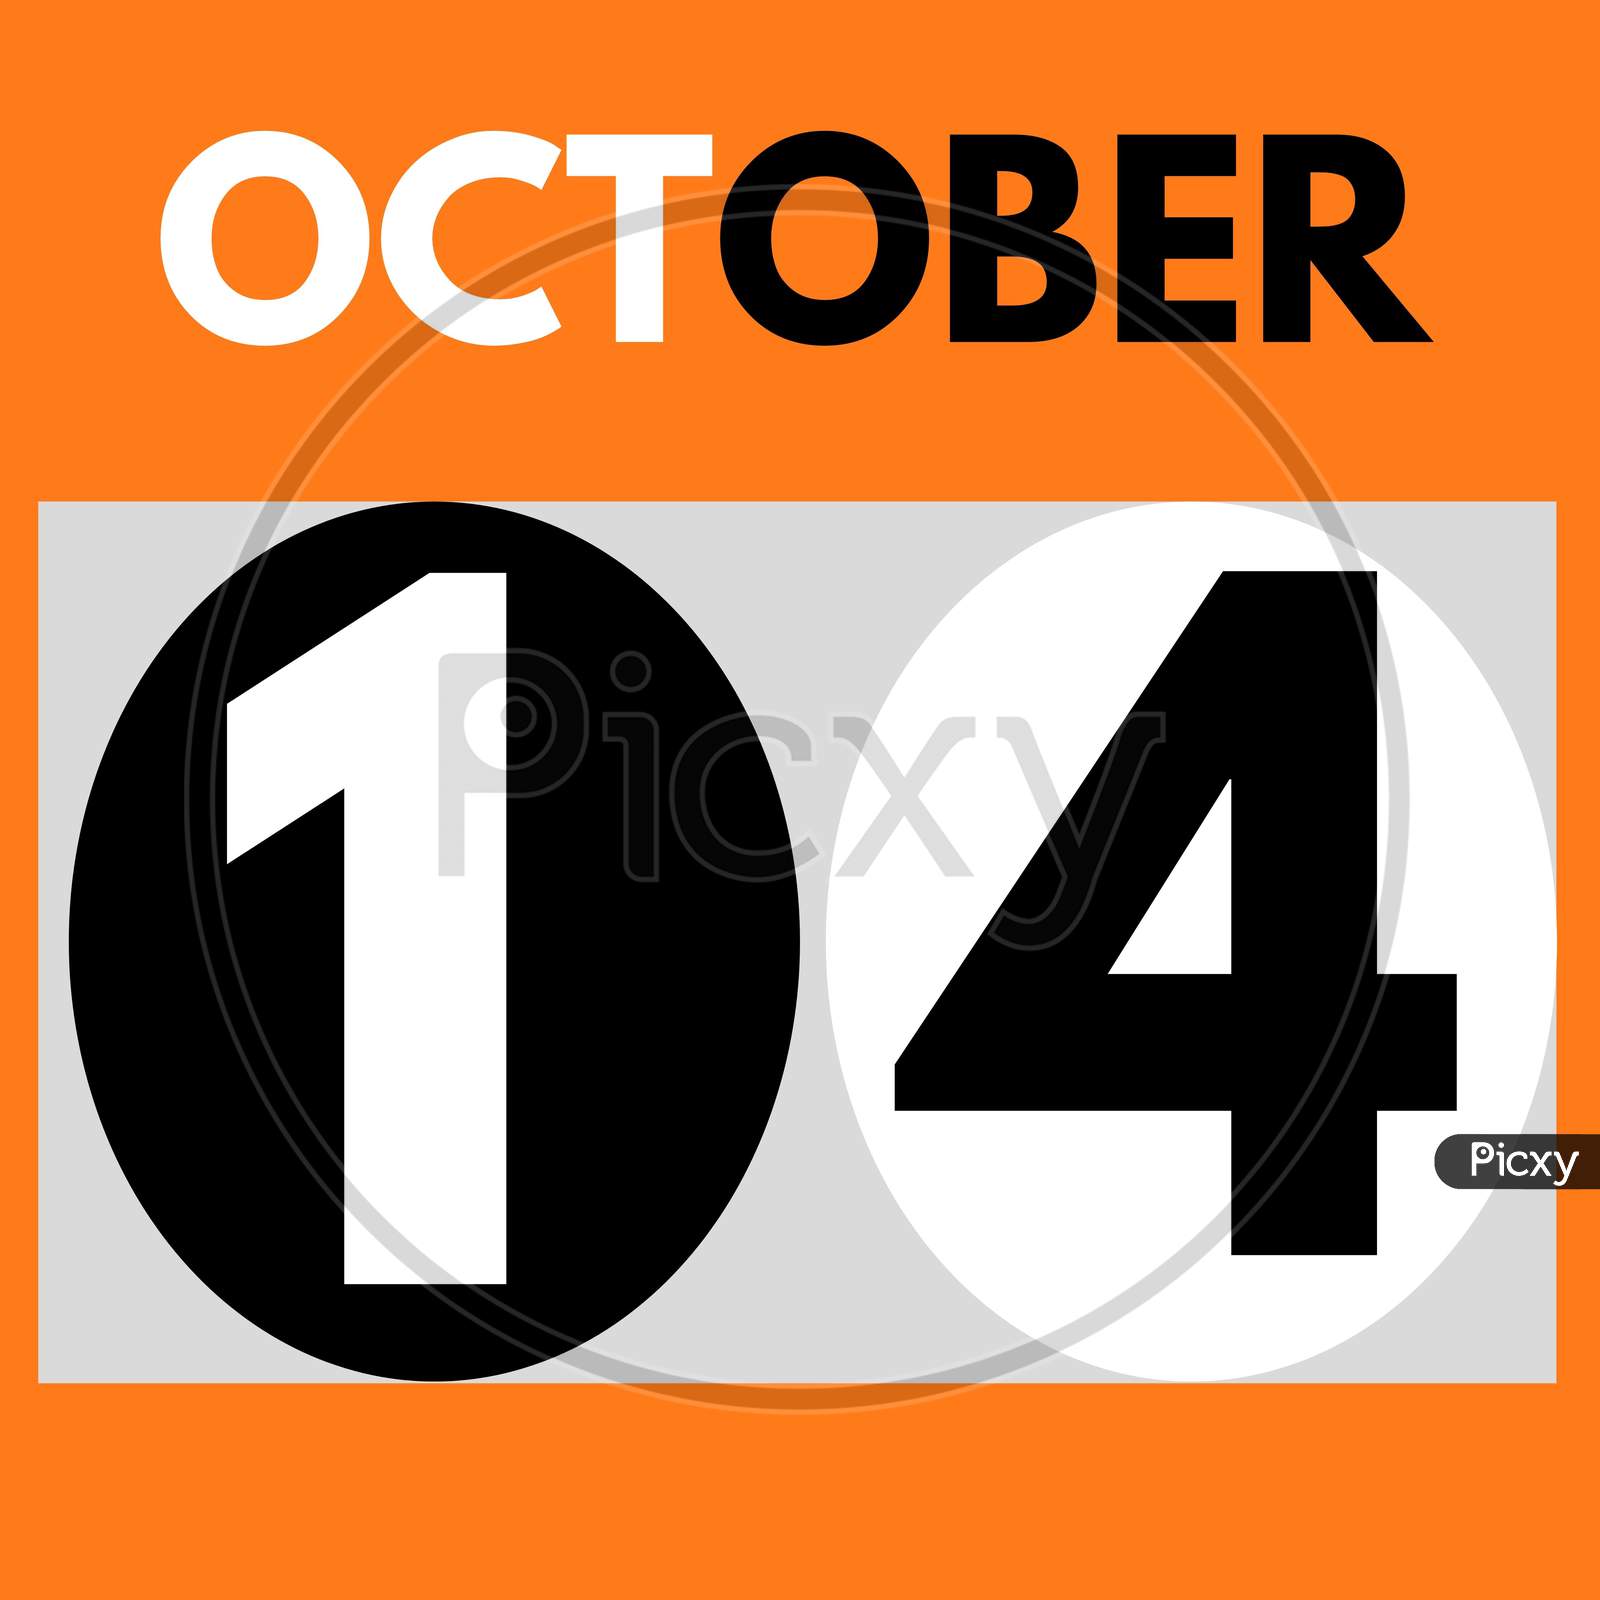 October 14 . Modern Daily Calendar Icon .Date ,Day, Month .Calendar For The Month Of October